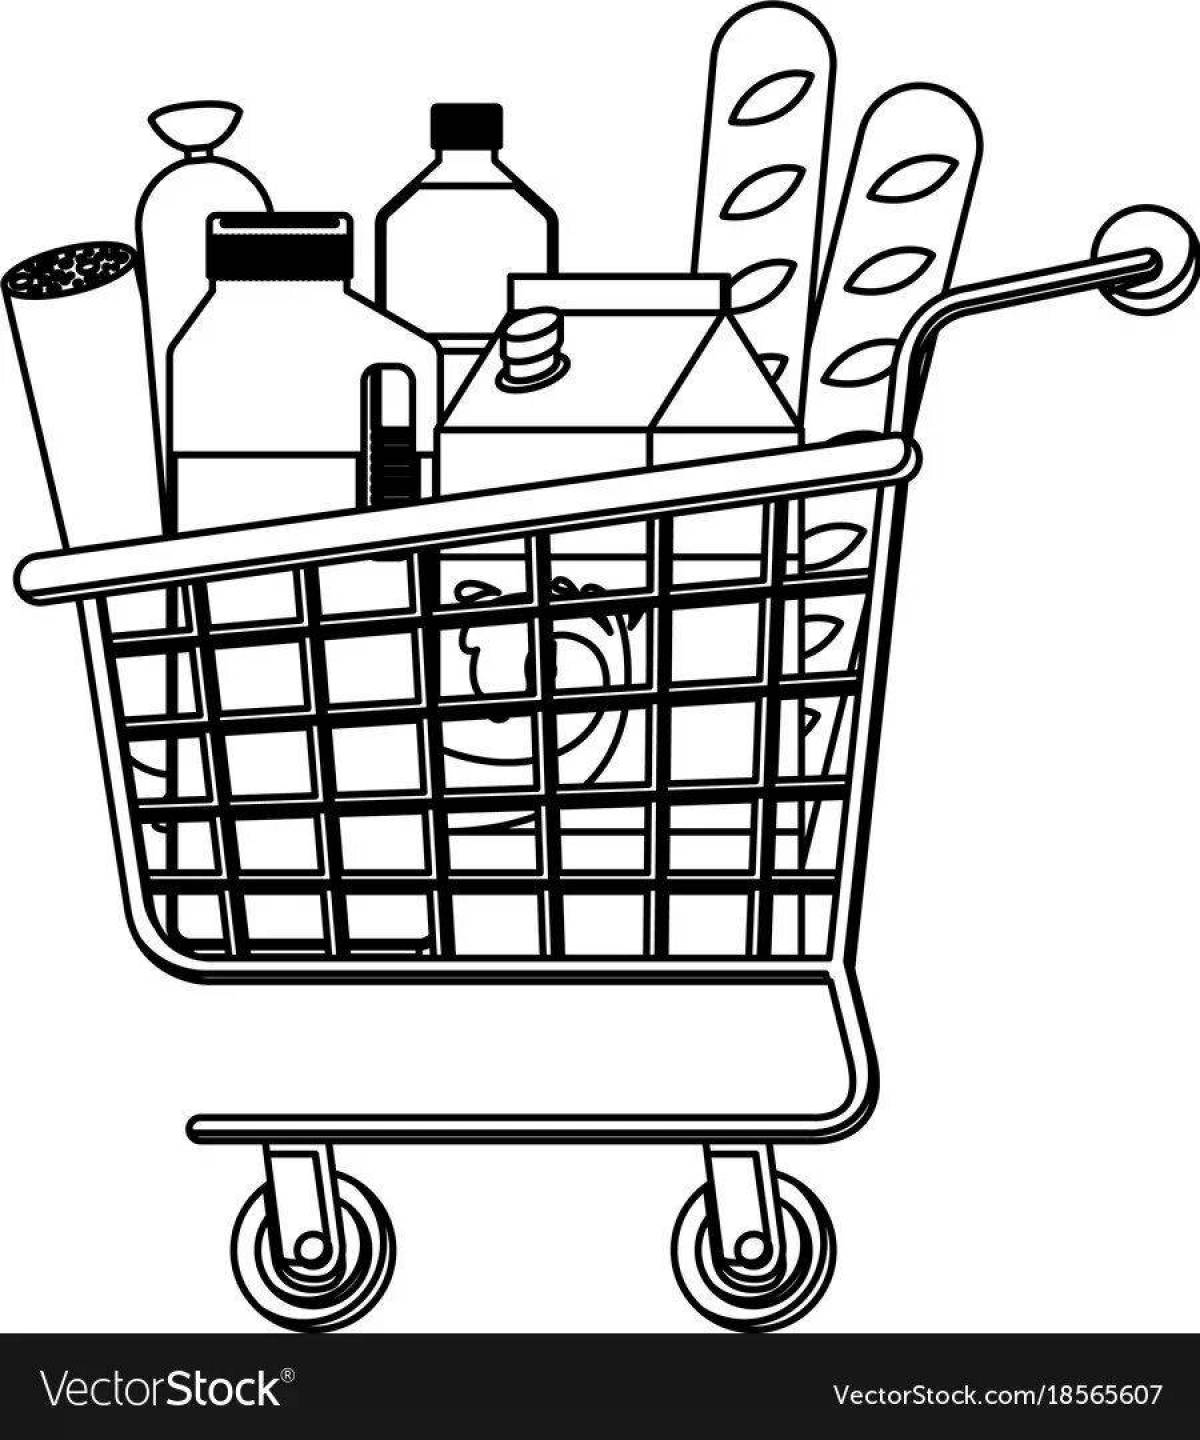 Luxury grocery cart coloring page